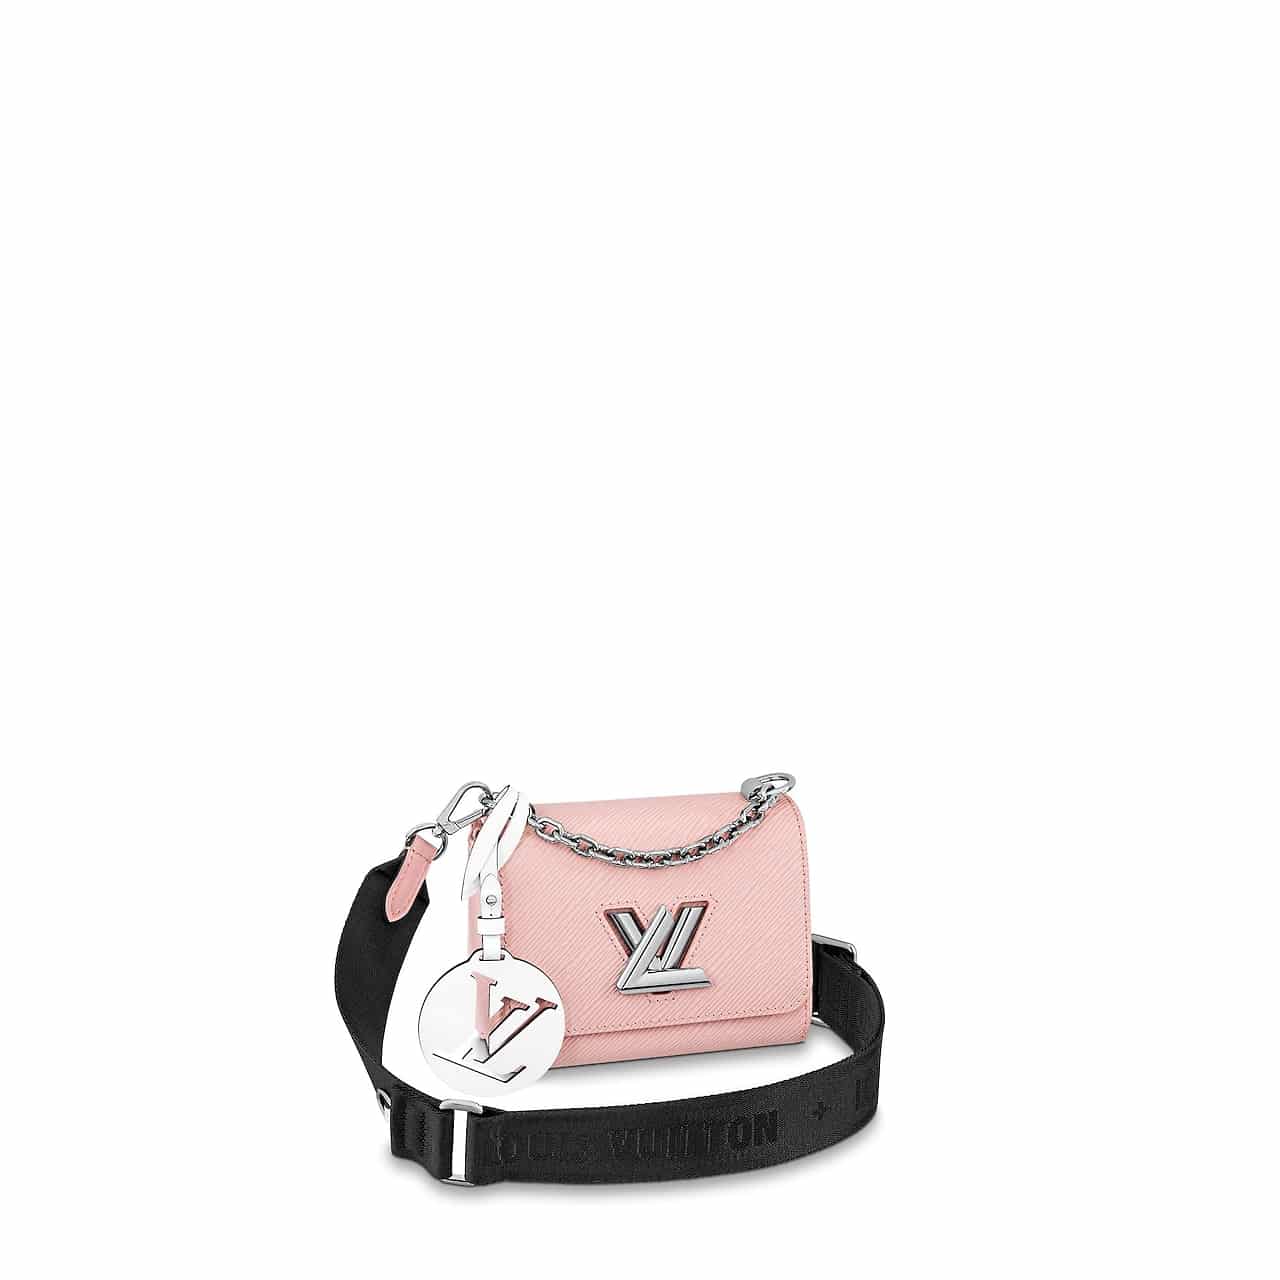 Louis Vuitton Fall/Winter 2020 Bag Collection Featuring Since 1854